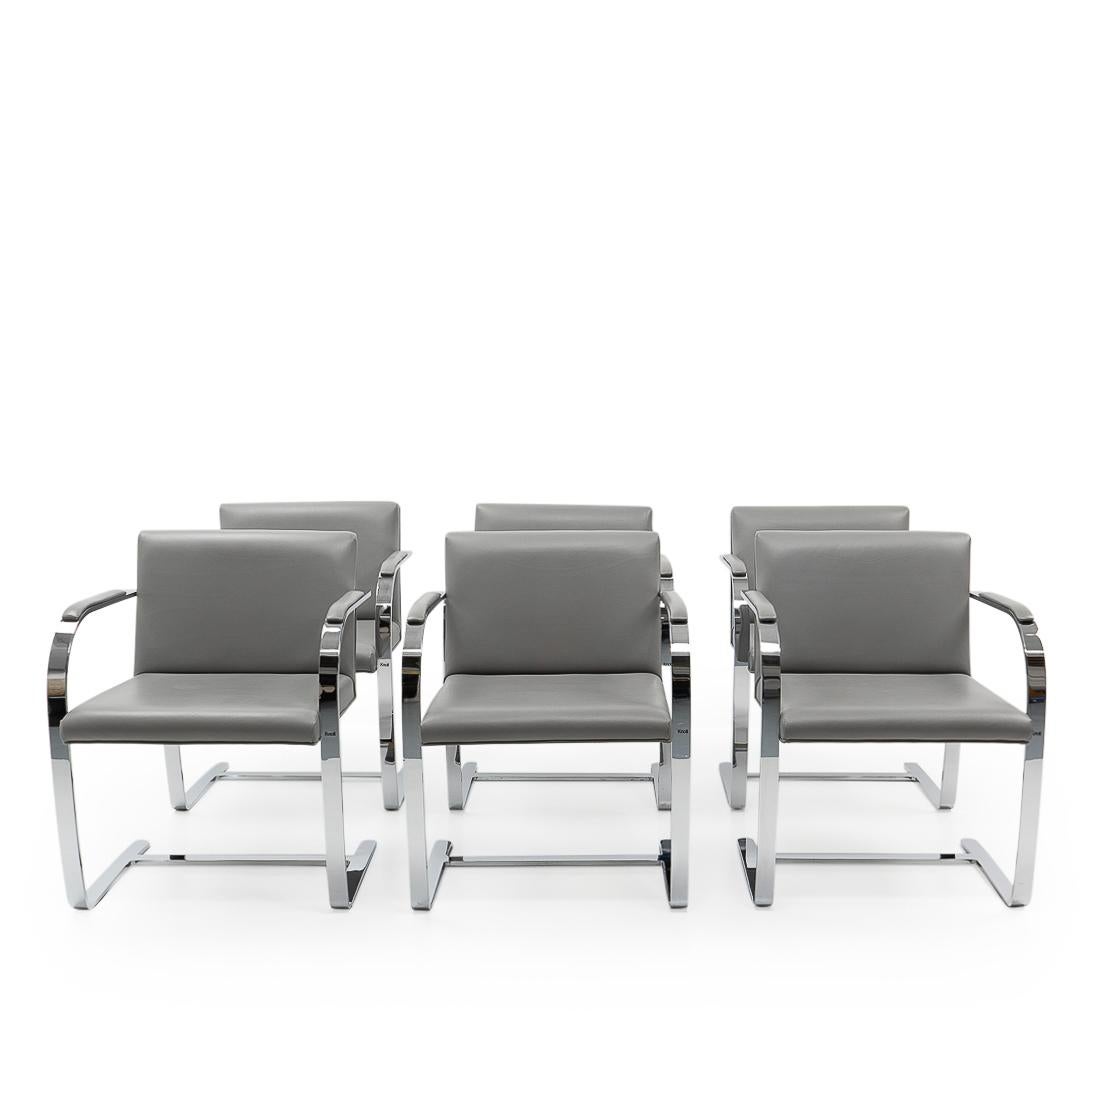 Set of of six BRNO Chairs by Ludwig Mies van der Rohe, produced by Gavina for Knoll during the 1980s.

These cantilever chairs were originally designed during the 1930s for use in the dining room of the Tugendhat villa, located in BRNO (Czech